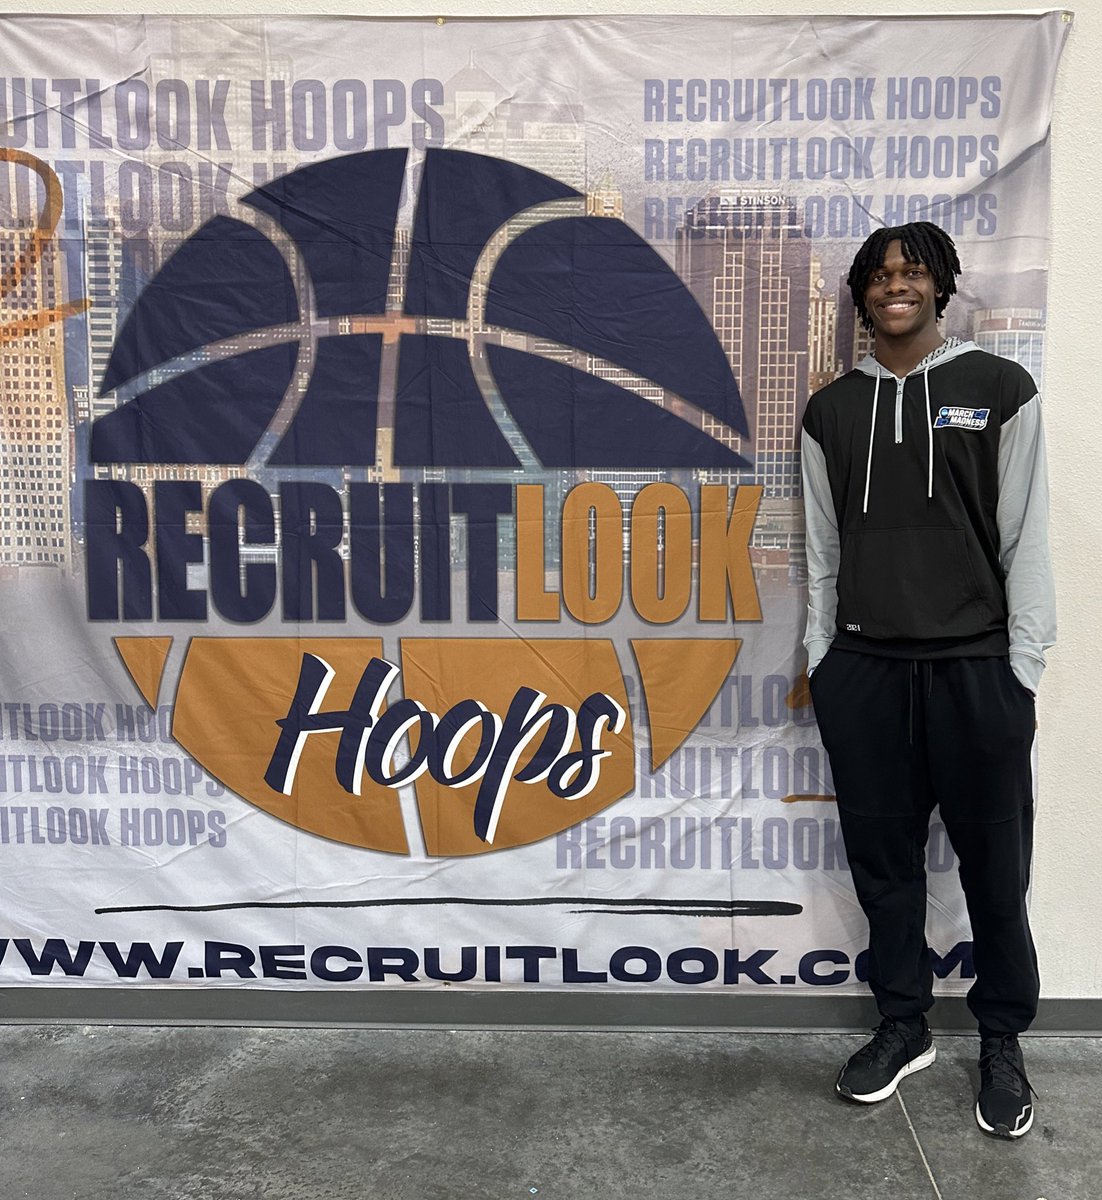 S/O @WilliamKyleIII for pulling up on us here at @RL_Hoops this weekend #RLHoops